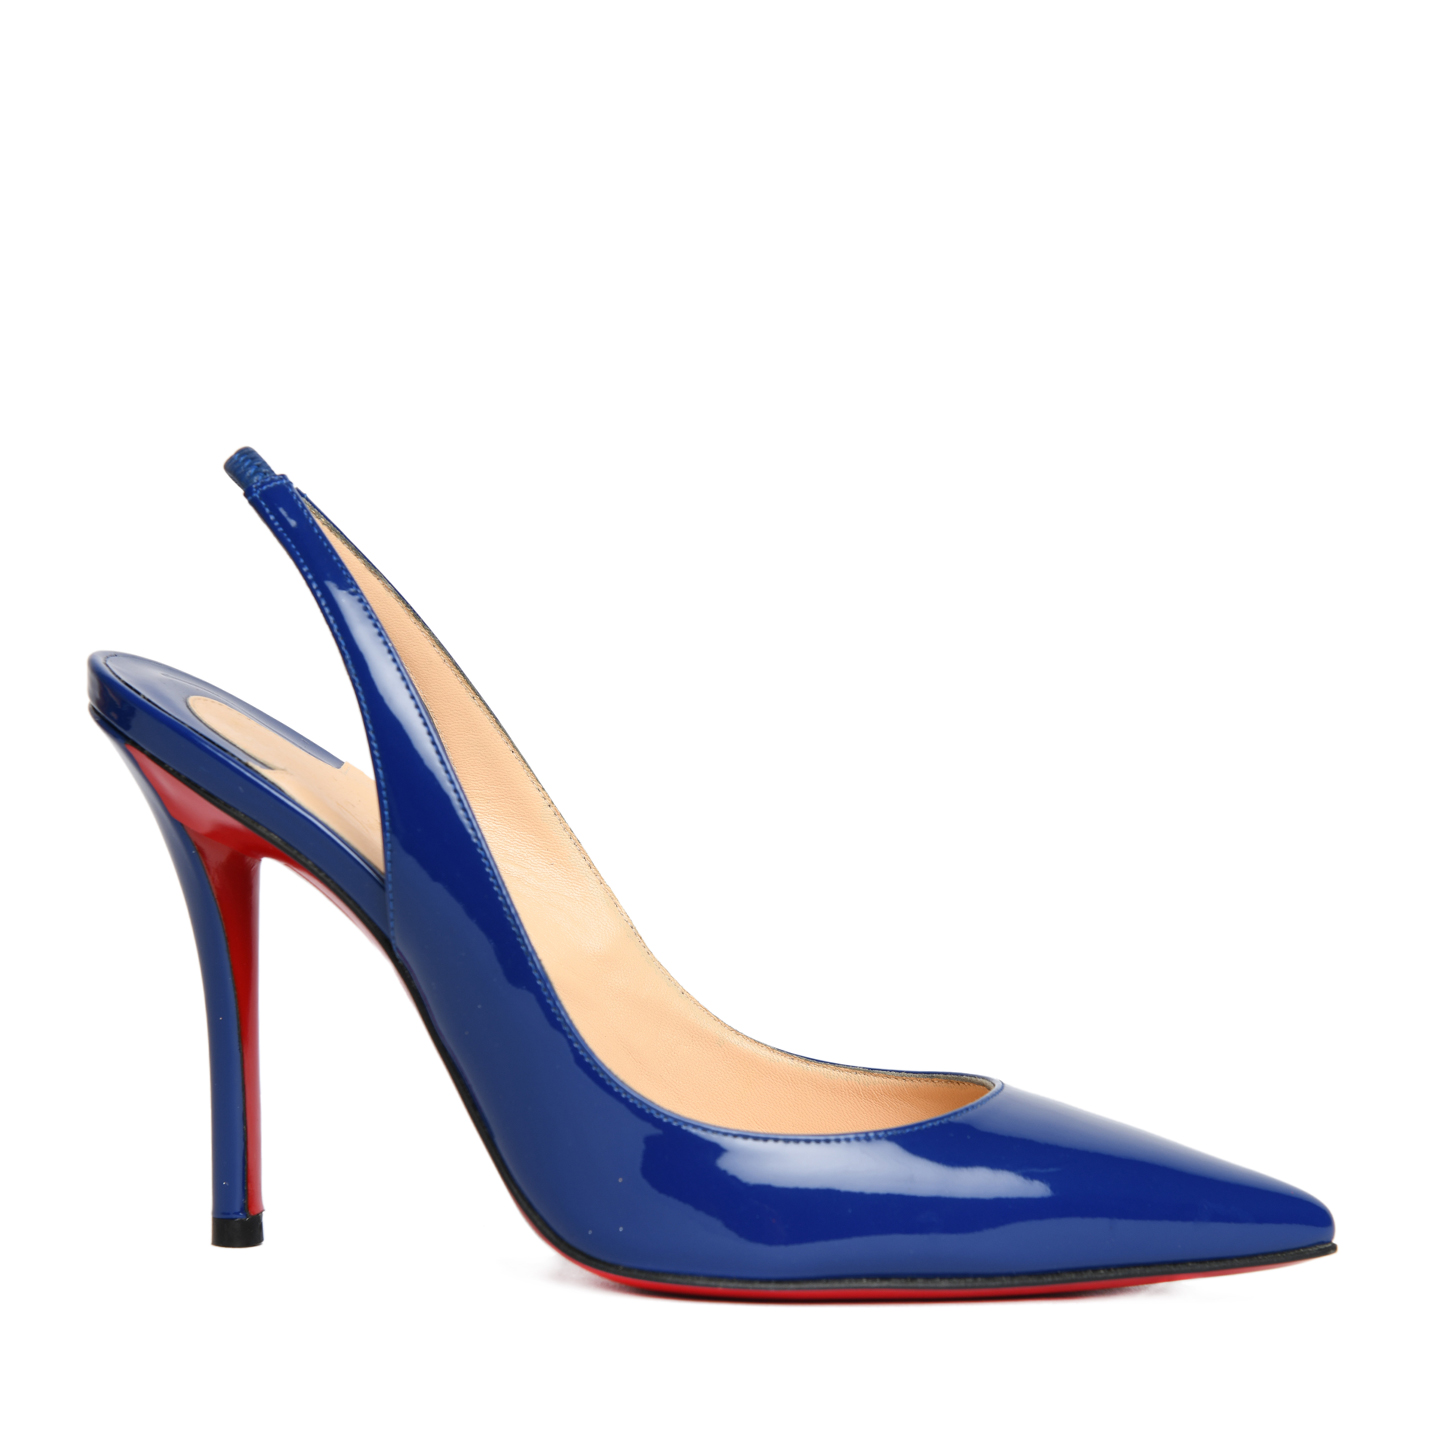 Christian Louboutin 'Apostrophy' Slingback Pumps, Size 35 - LabelCentric